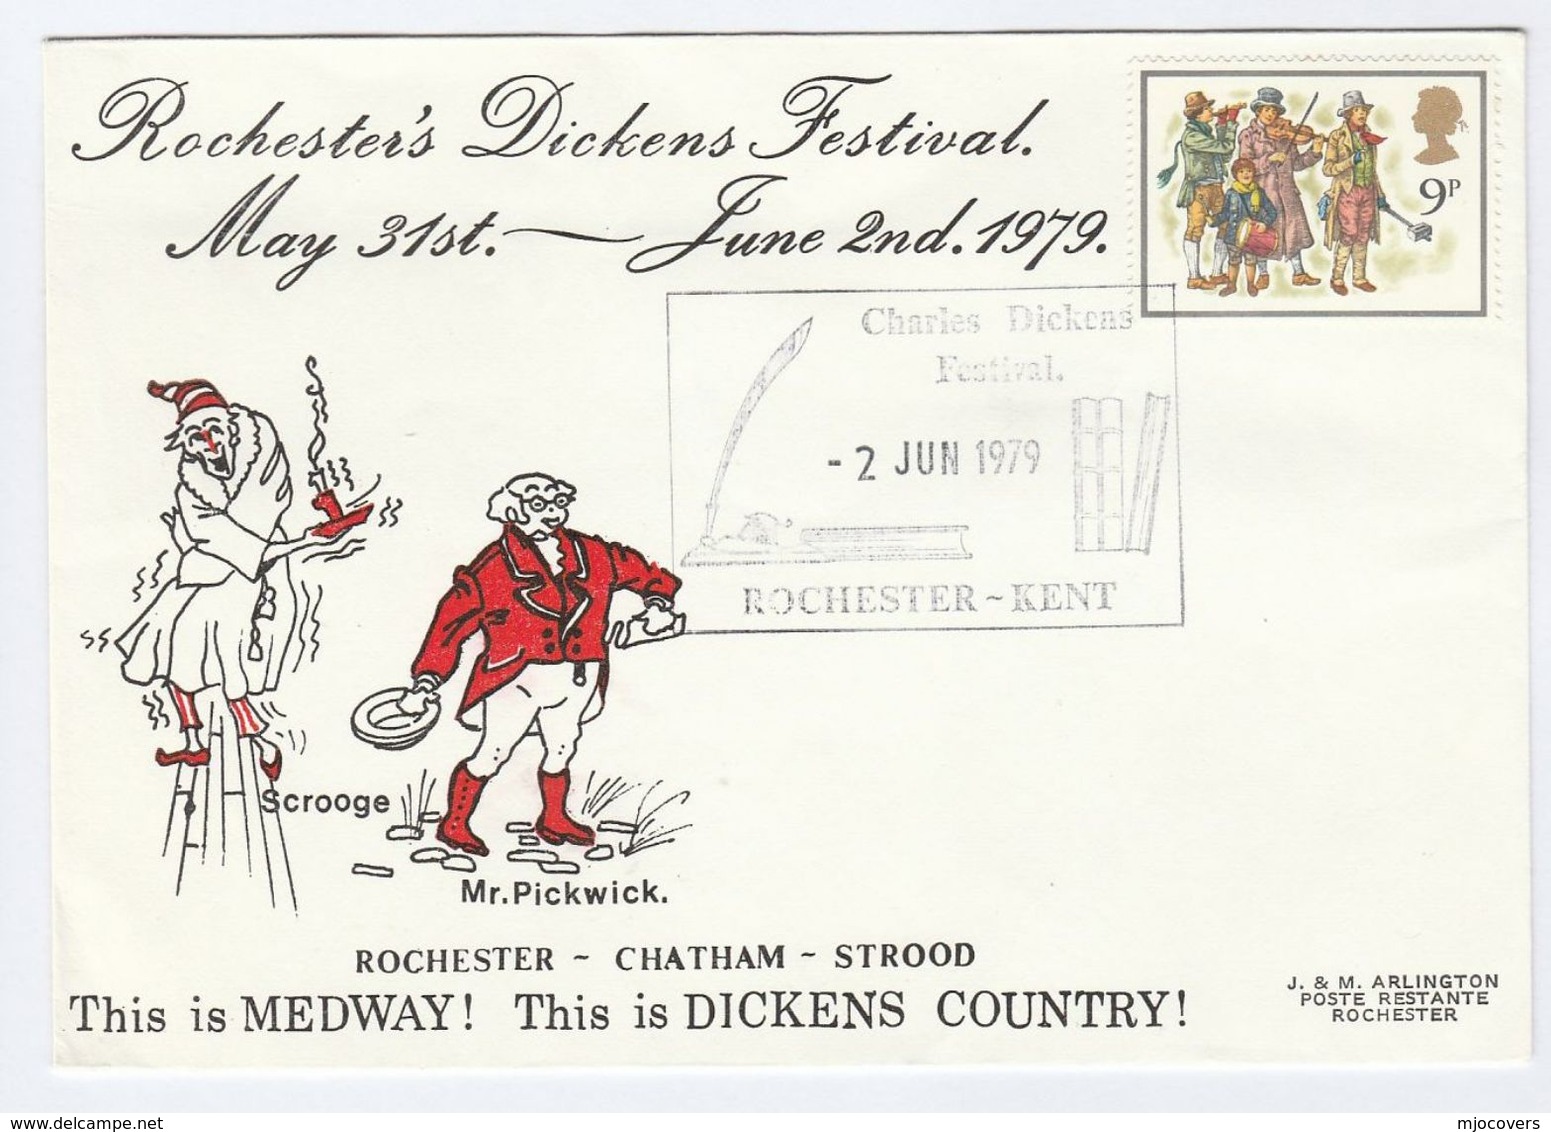 1979 ROCHESTER  DICKENS FESTIVAL Event COVER  Scrooge Mr Pickwick Candle Qipp Pen  Literature Stamps Christmas GB - Covers & Documents